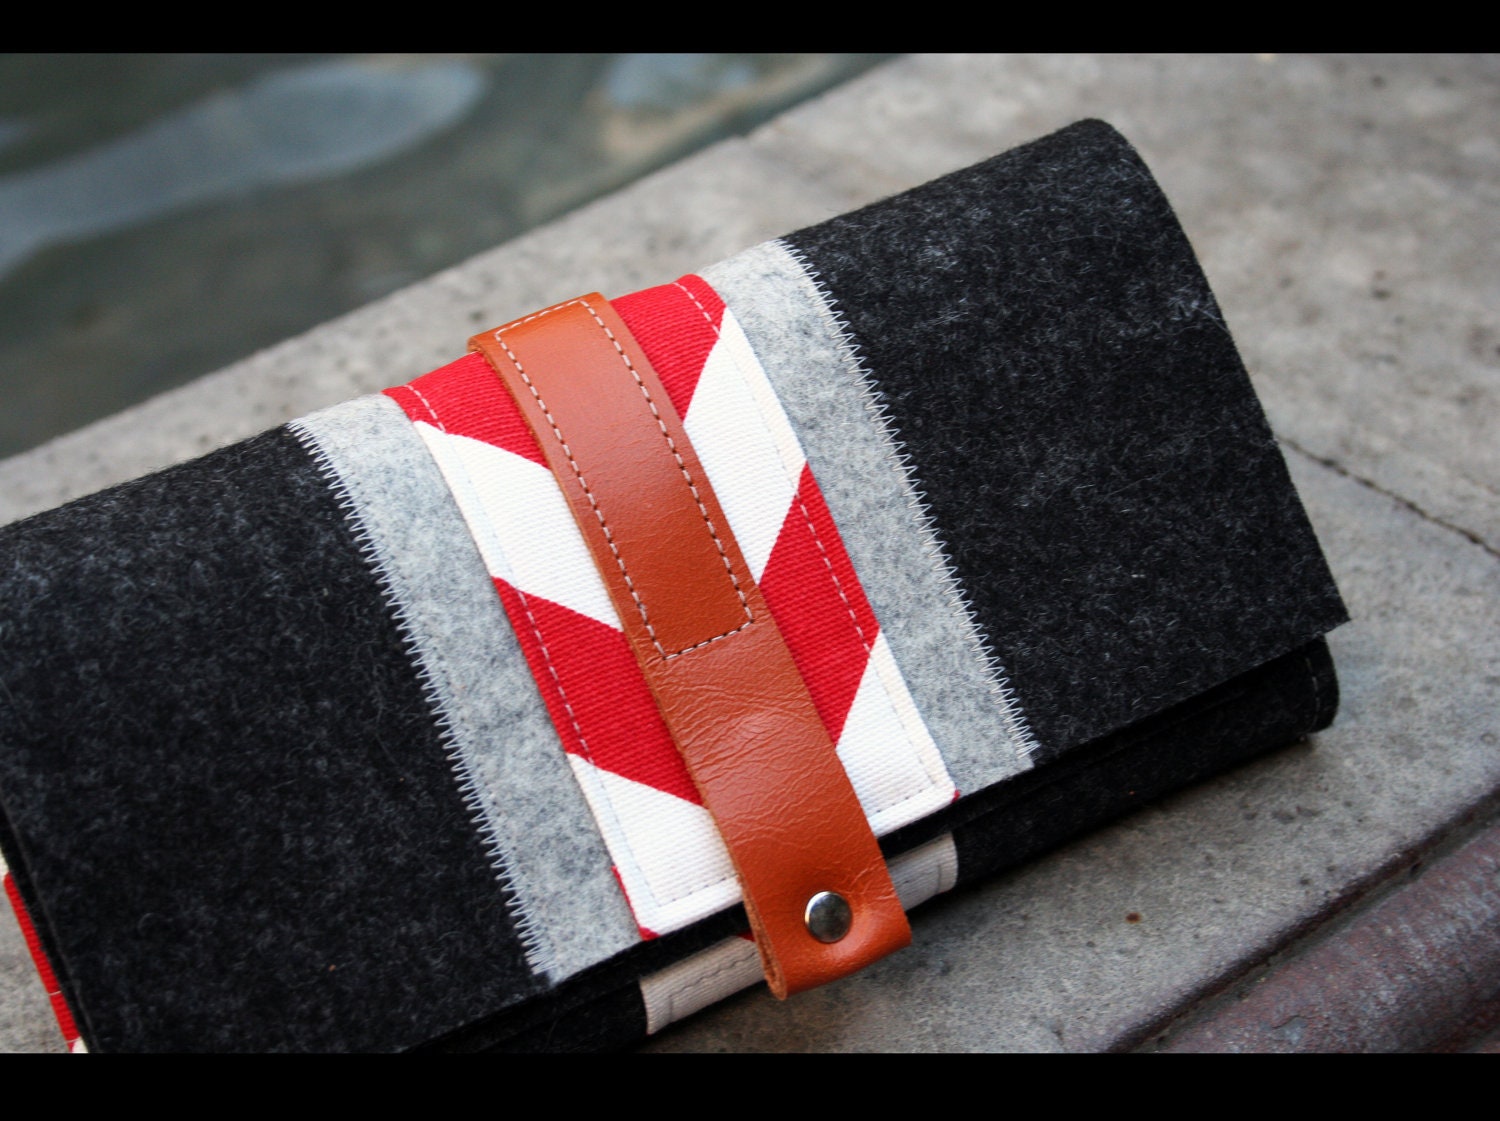 Merino wool felt Iphone trifold wallet - grey combination and red chevron accent